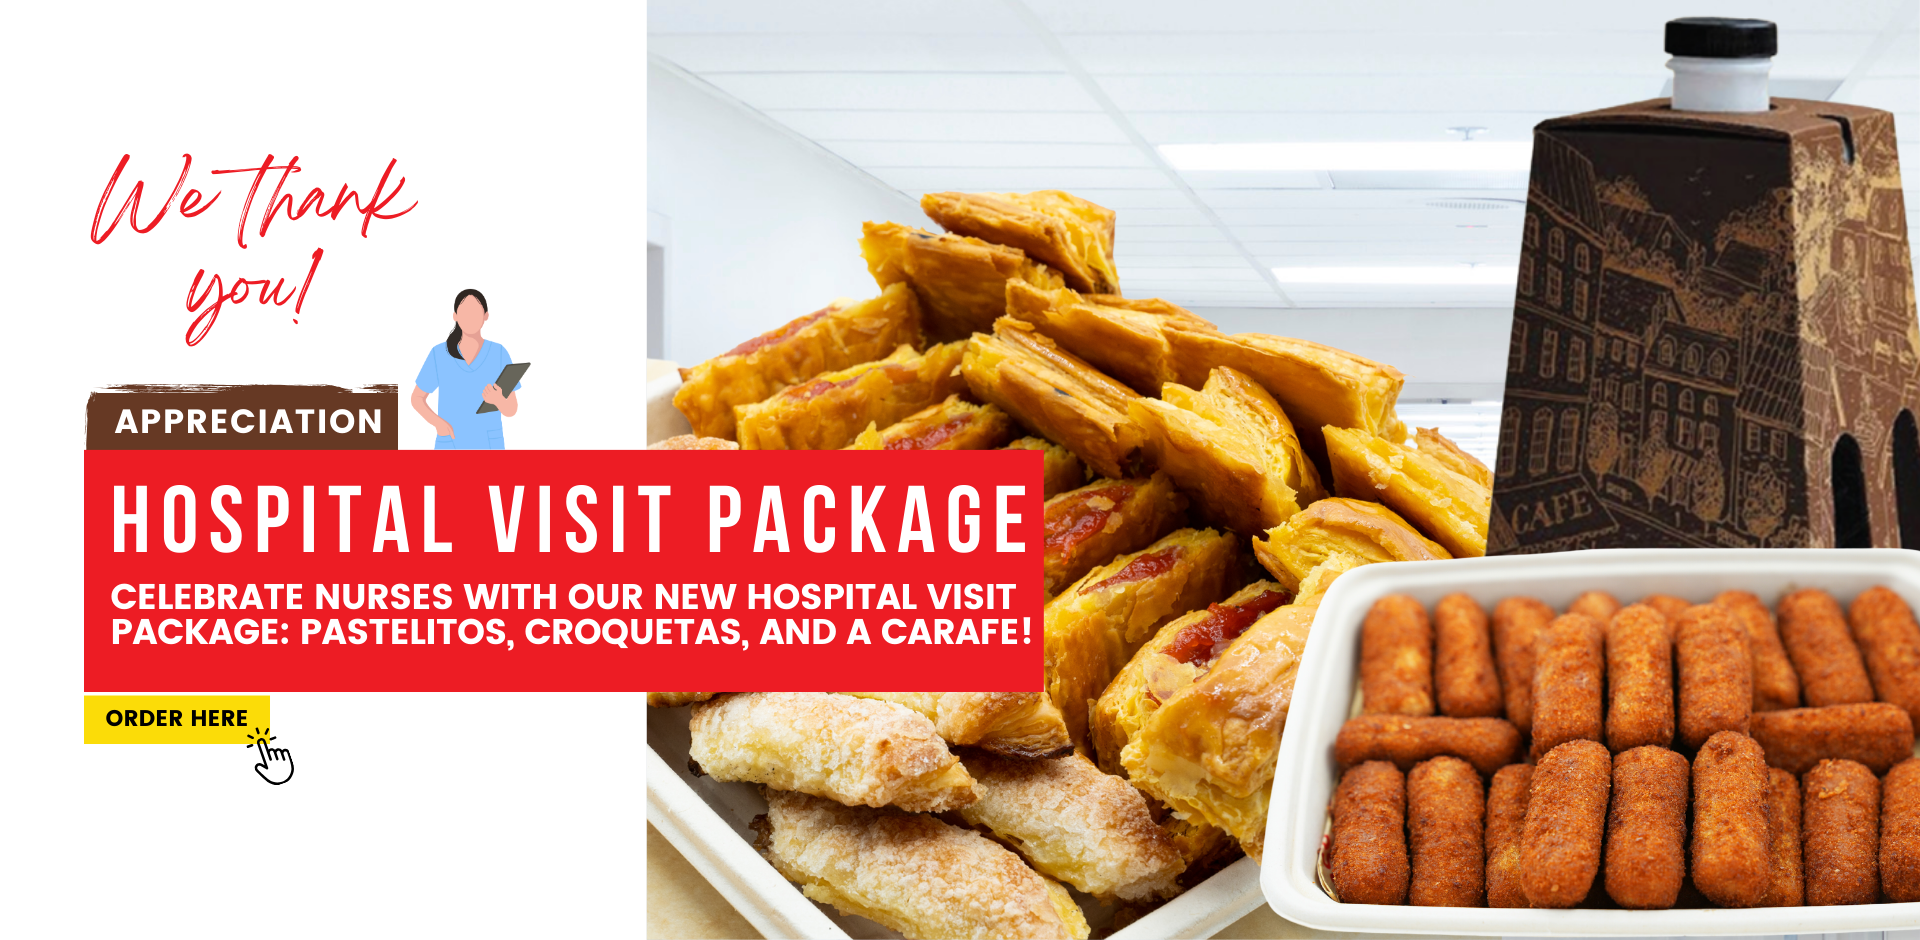 We thank you. appreciation. Hospital Visit Package. Celebrate nurses with our new Hospital Visit Package: pastelitos, croquetas, and a carafe! Order Here